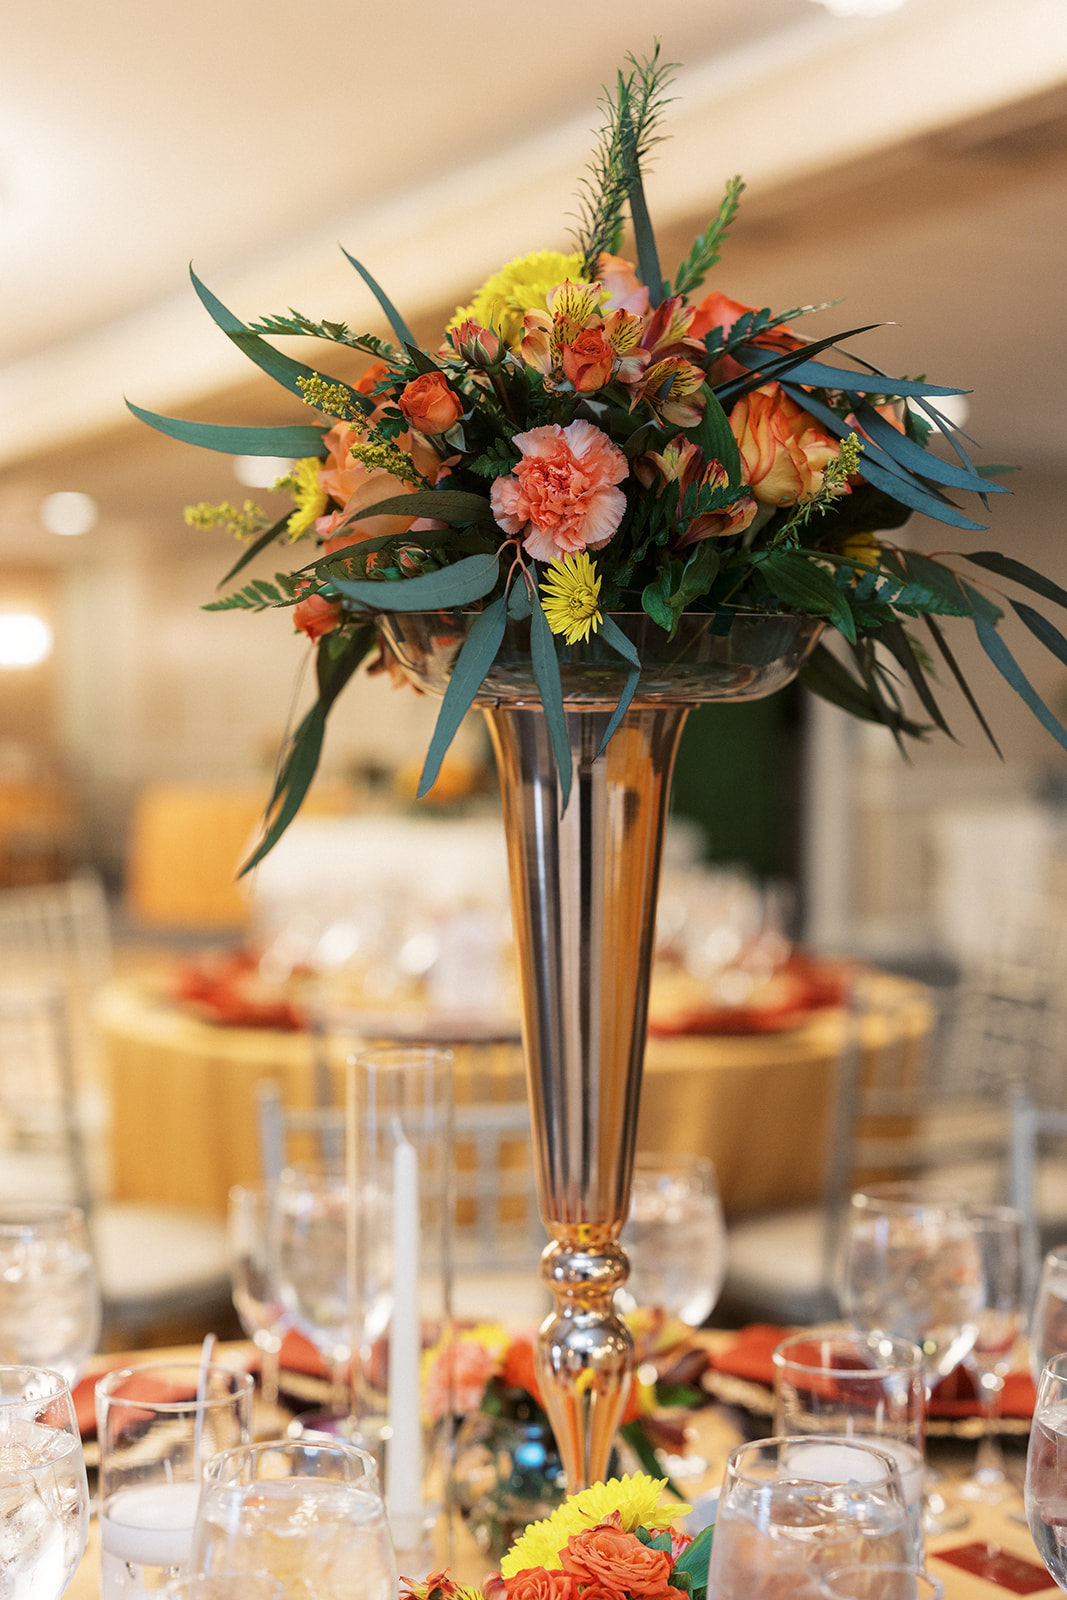 Details of a wedding reception center piece at The Shore Club Boutique Hotel